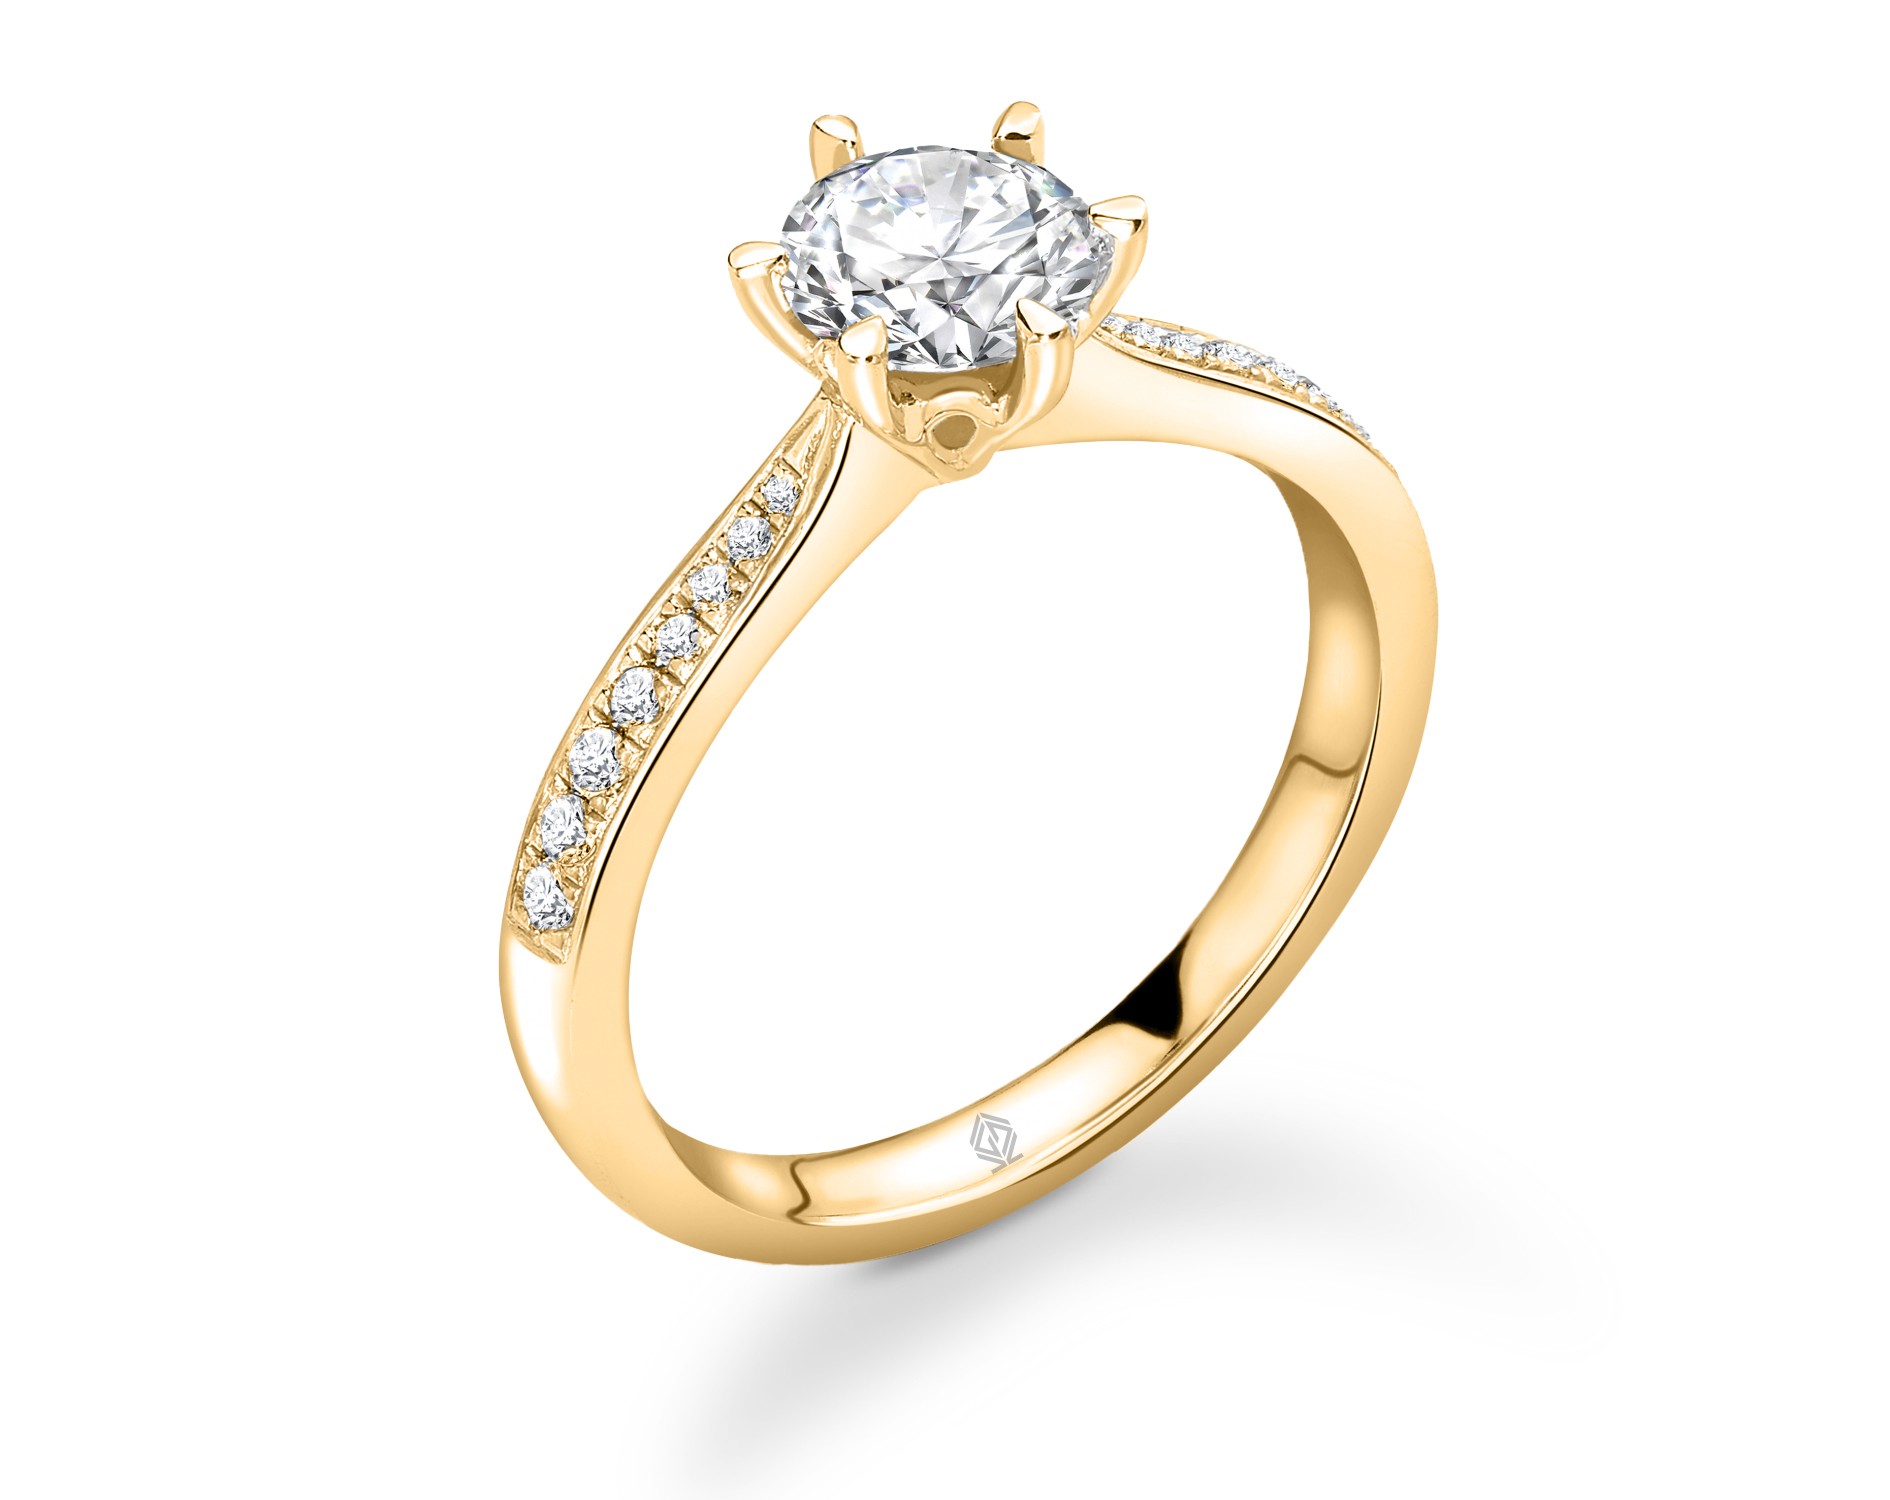 18K YELLOW GOLD ROUND CUT 6 PRONGS DIAMOND ENGAGEMENT RING WITH CHANNEL SET SIDE STONES